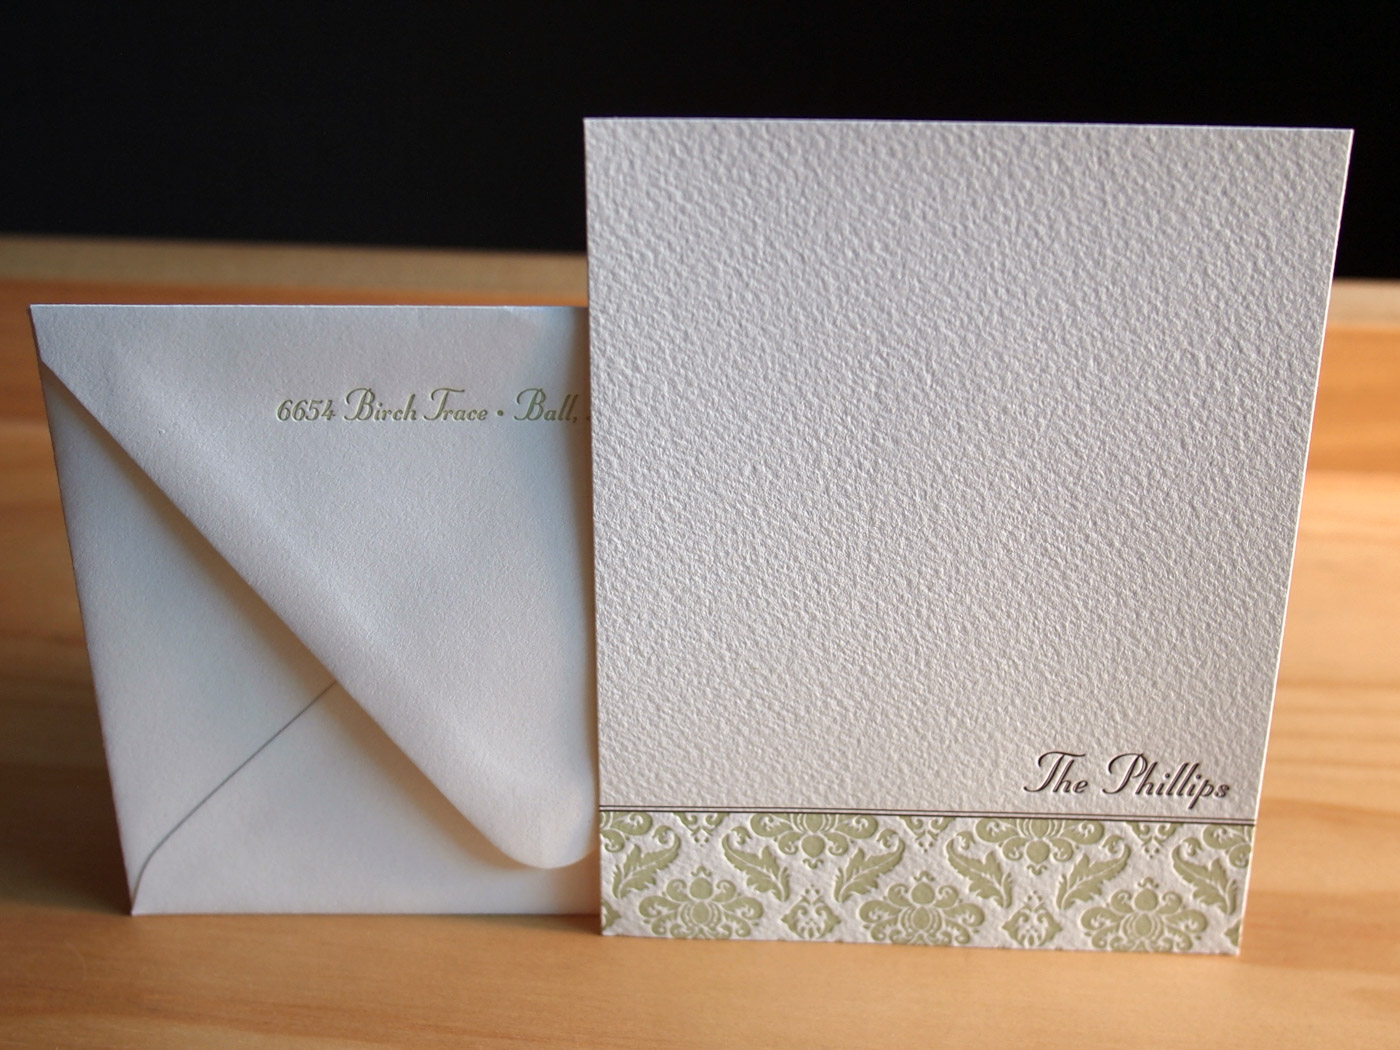 Personalized Stationery from Parklife Press